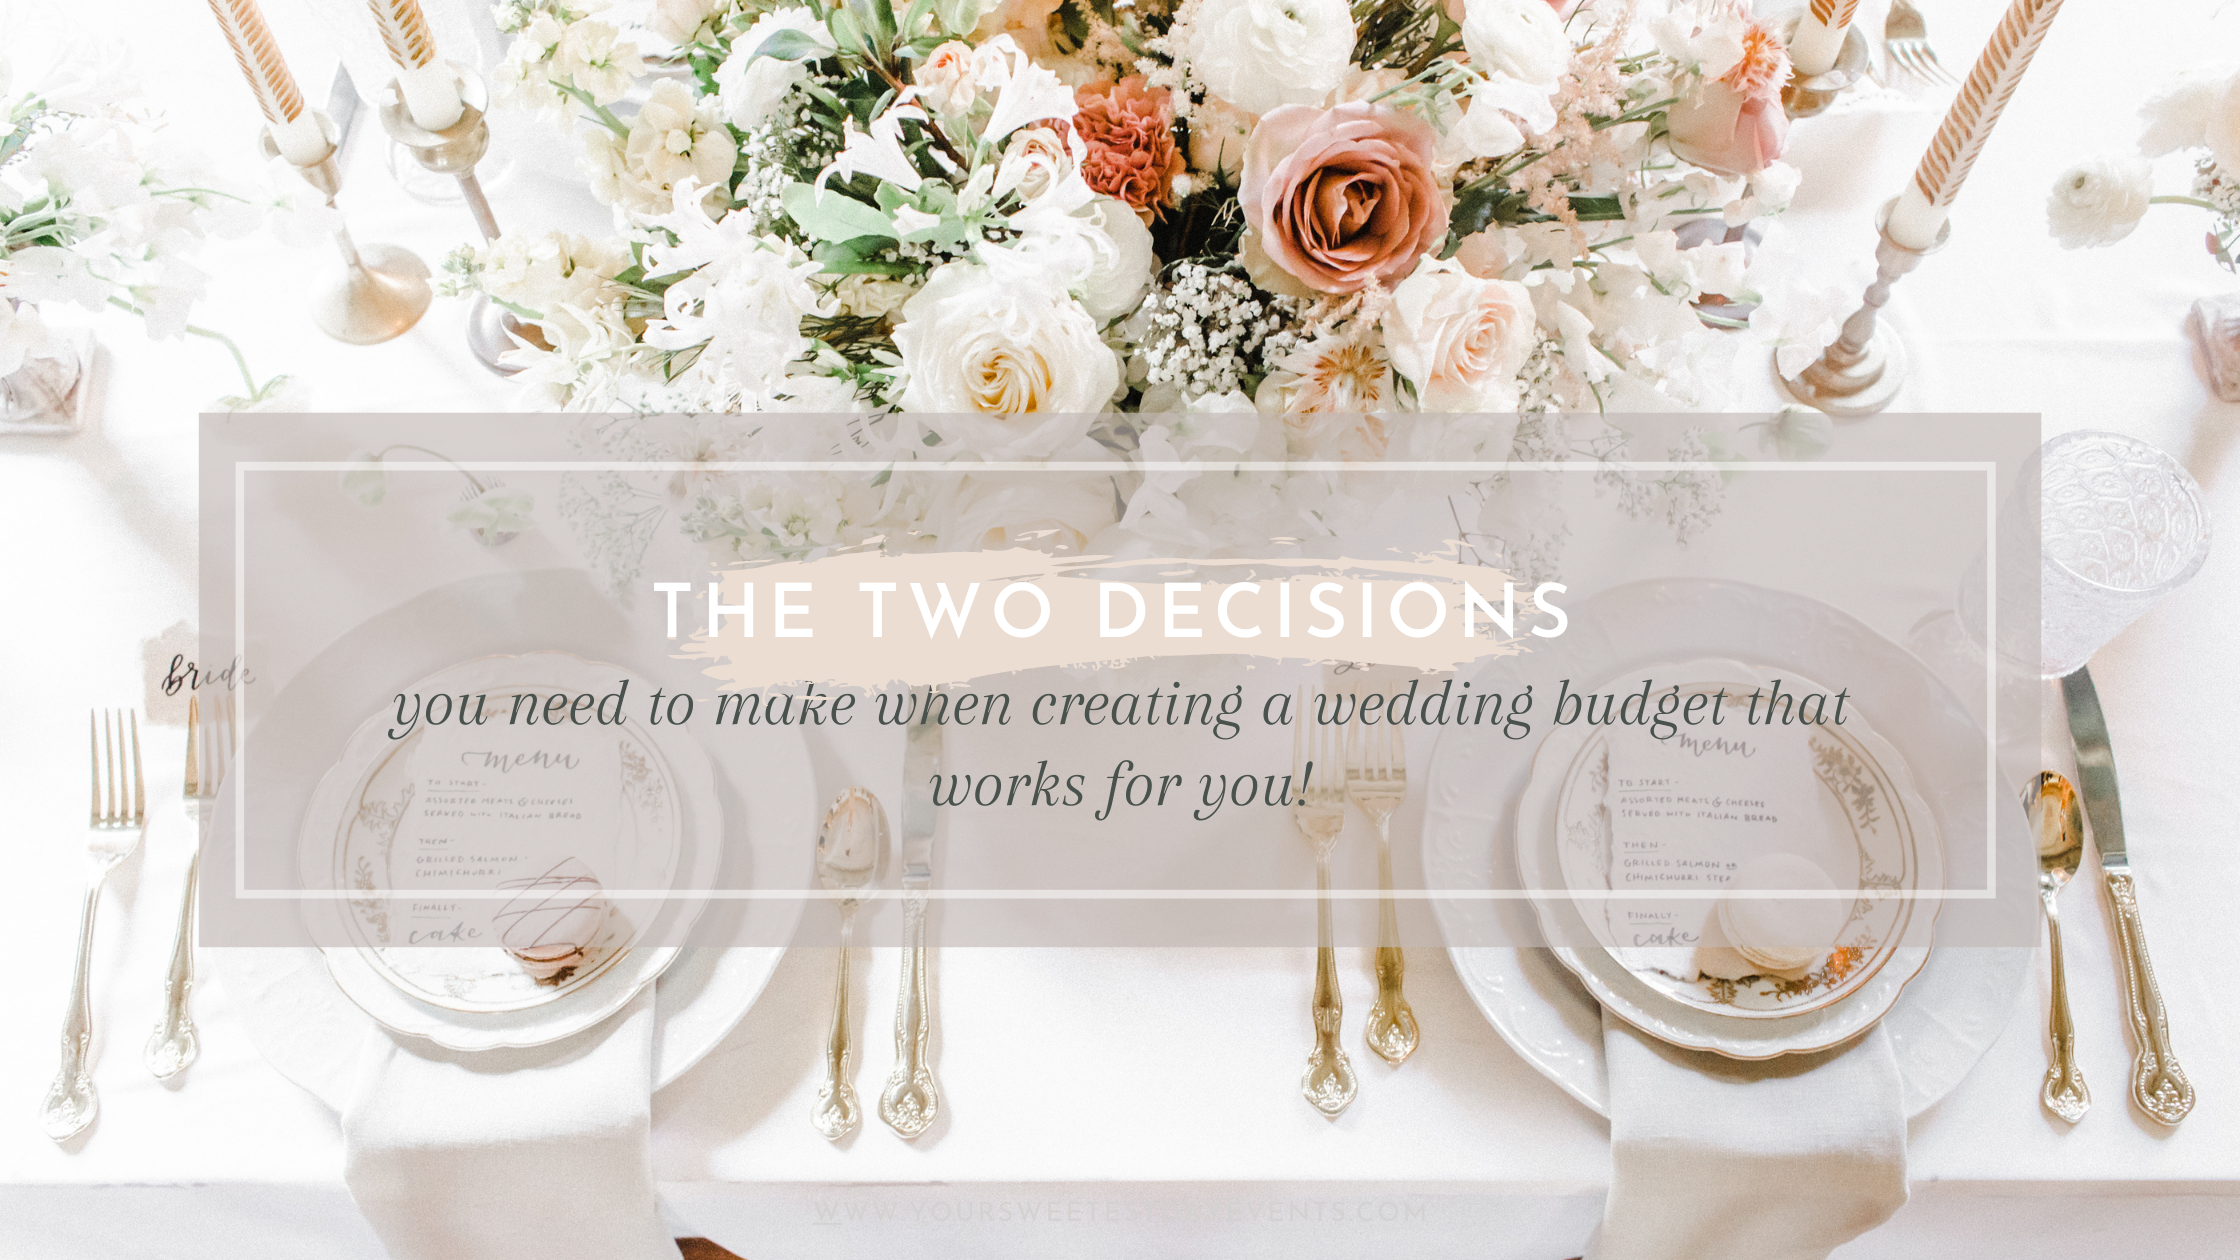 The Two Decisions You Need to Make First When Creating A Wedding Budget That Actually Works For You // Your Sweetest Day Events (relevant hashtags: #weddingplanning #budgeting #howtobudget #budgetingmistakes #budgetingtips